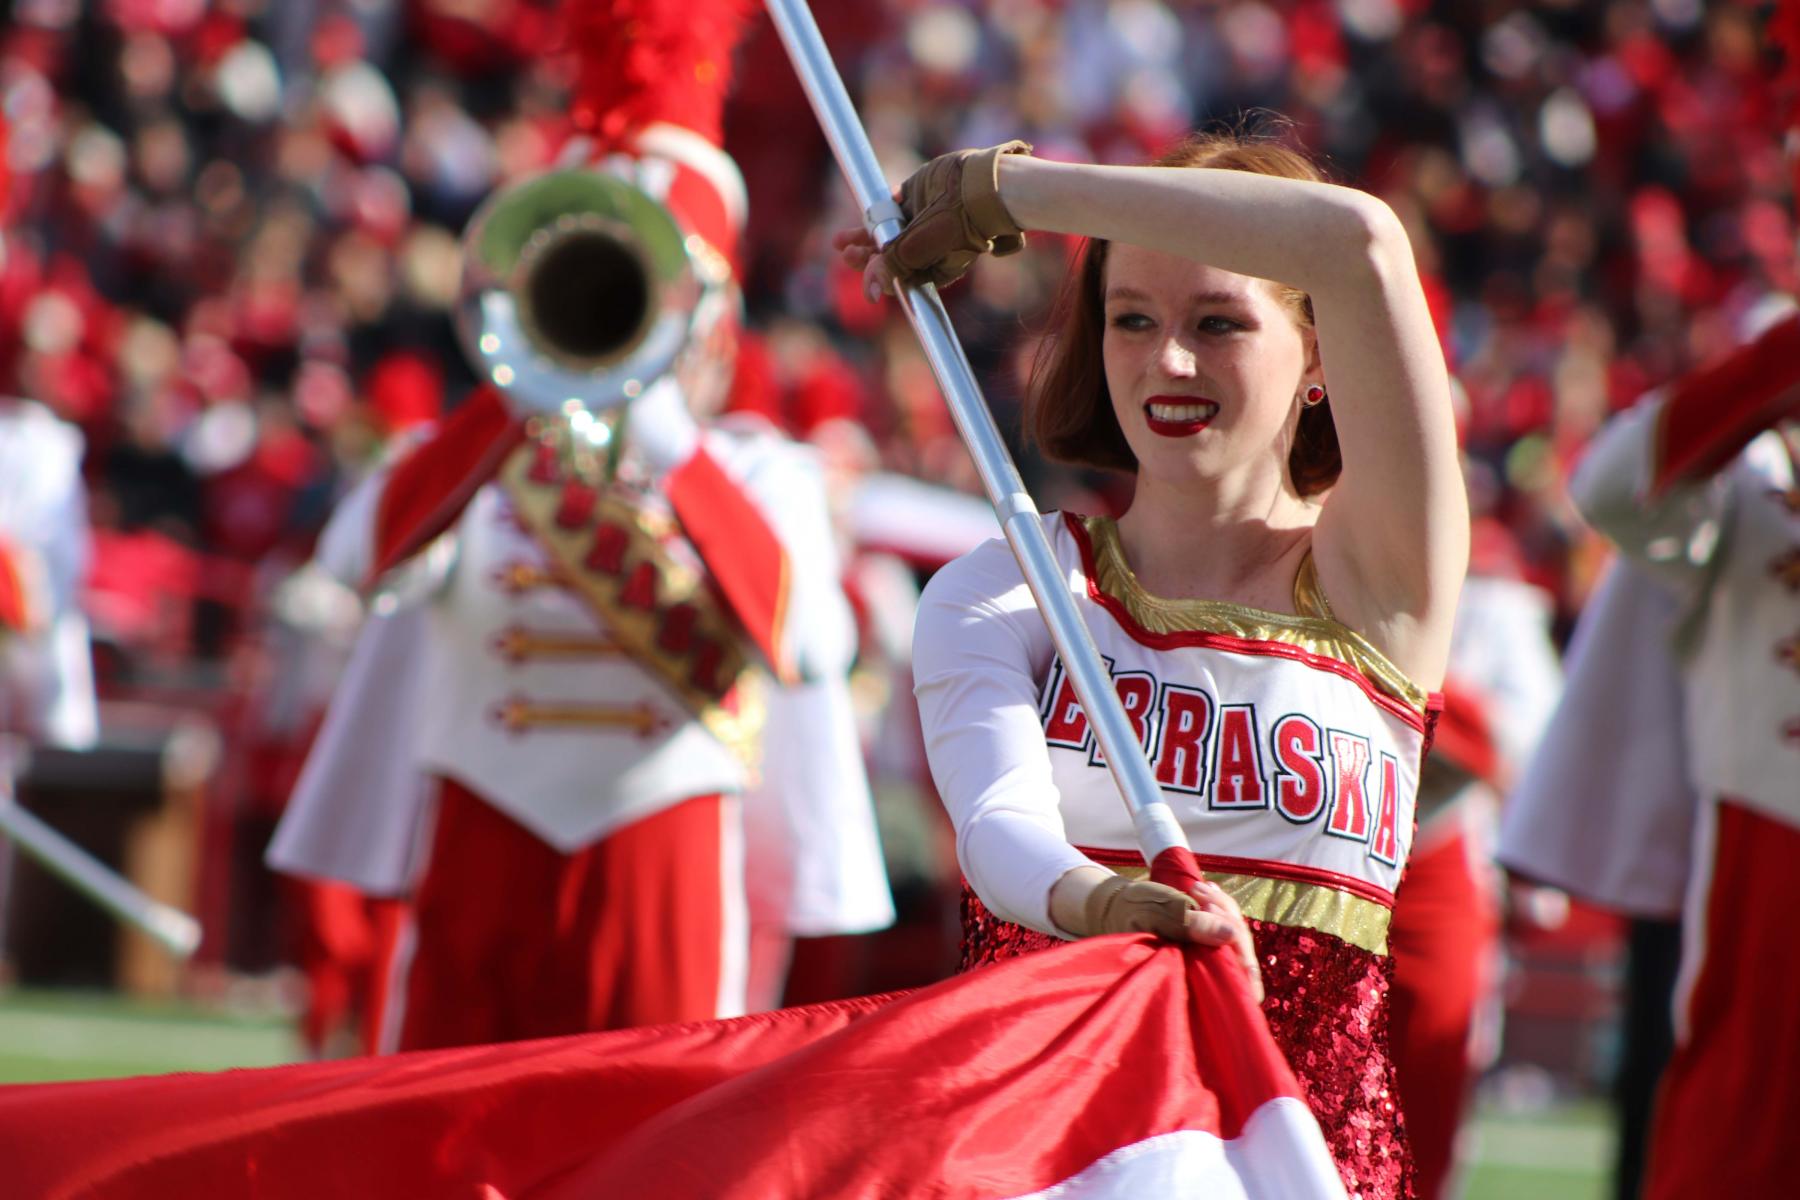 Cornhusker Marching Band color guard.